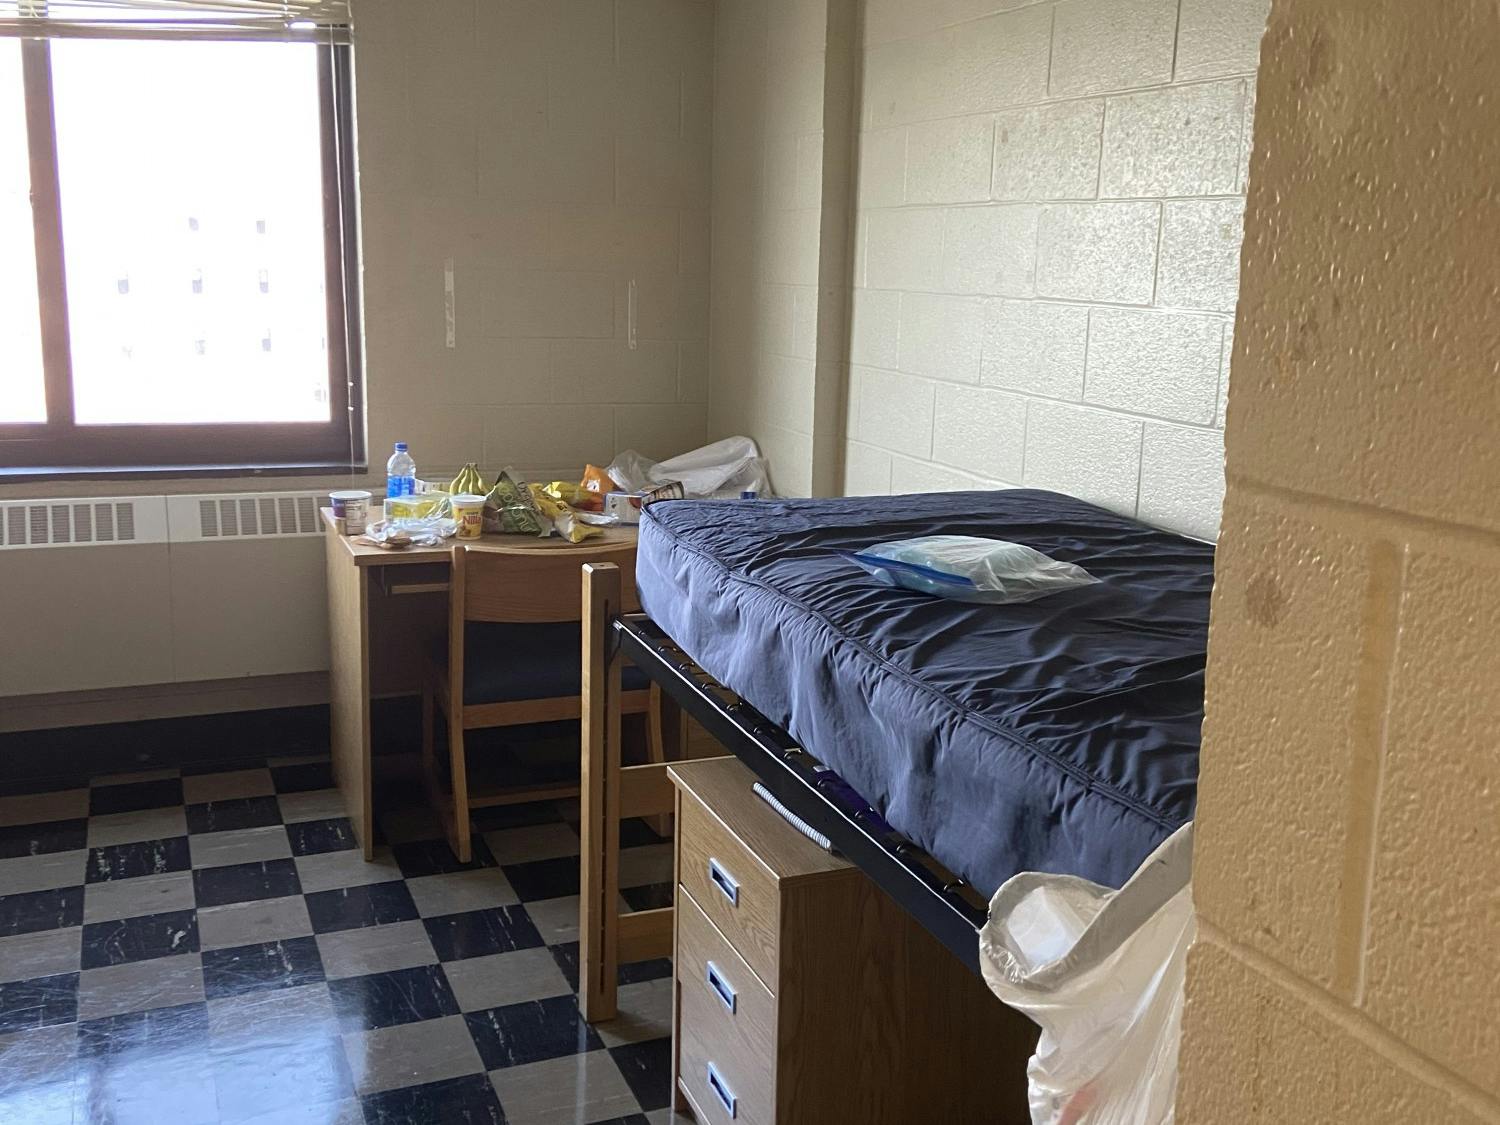 Thomas insists that UB is not being honest with students about the conditions inside the dorms and that no one is checking on quarantined students.